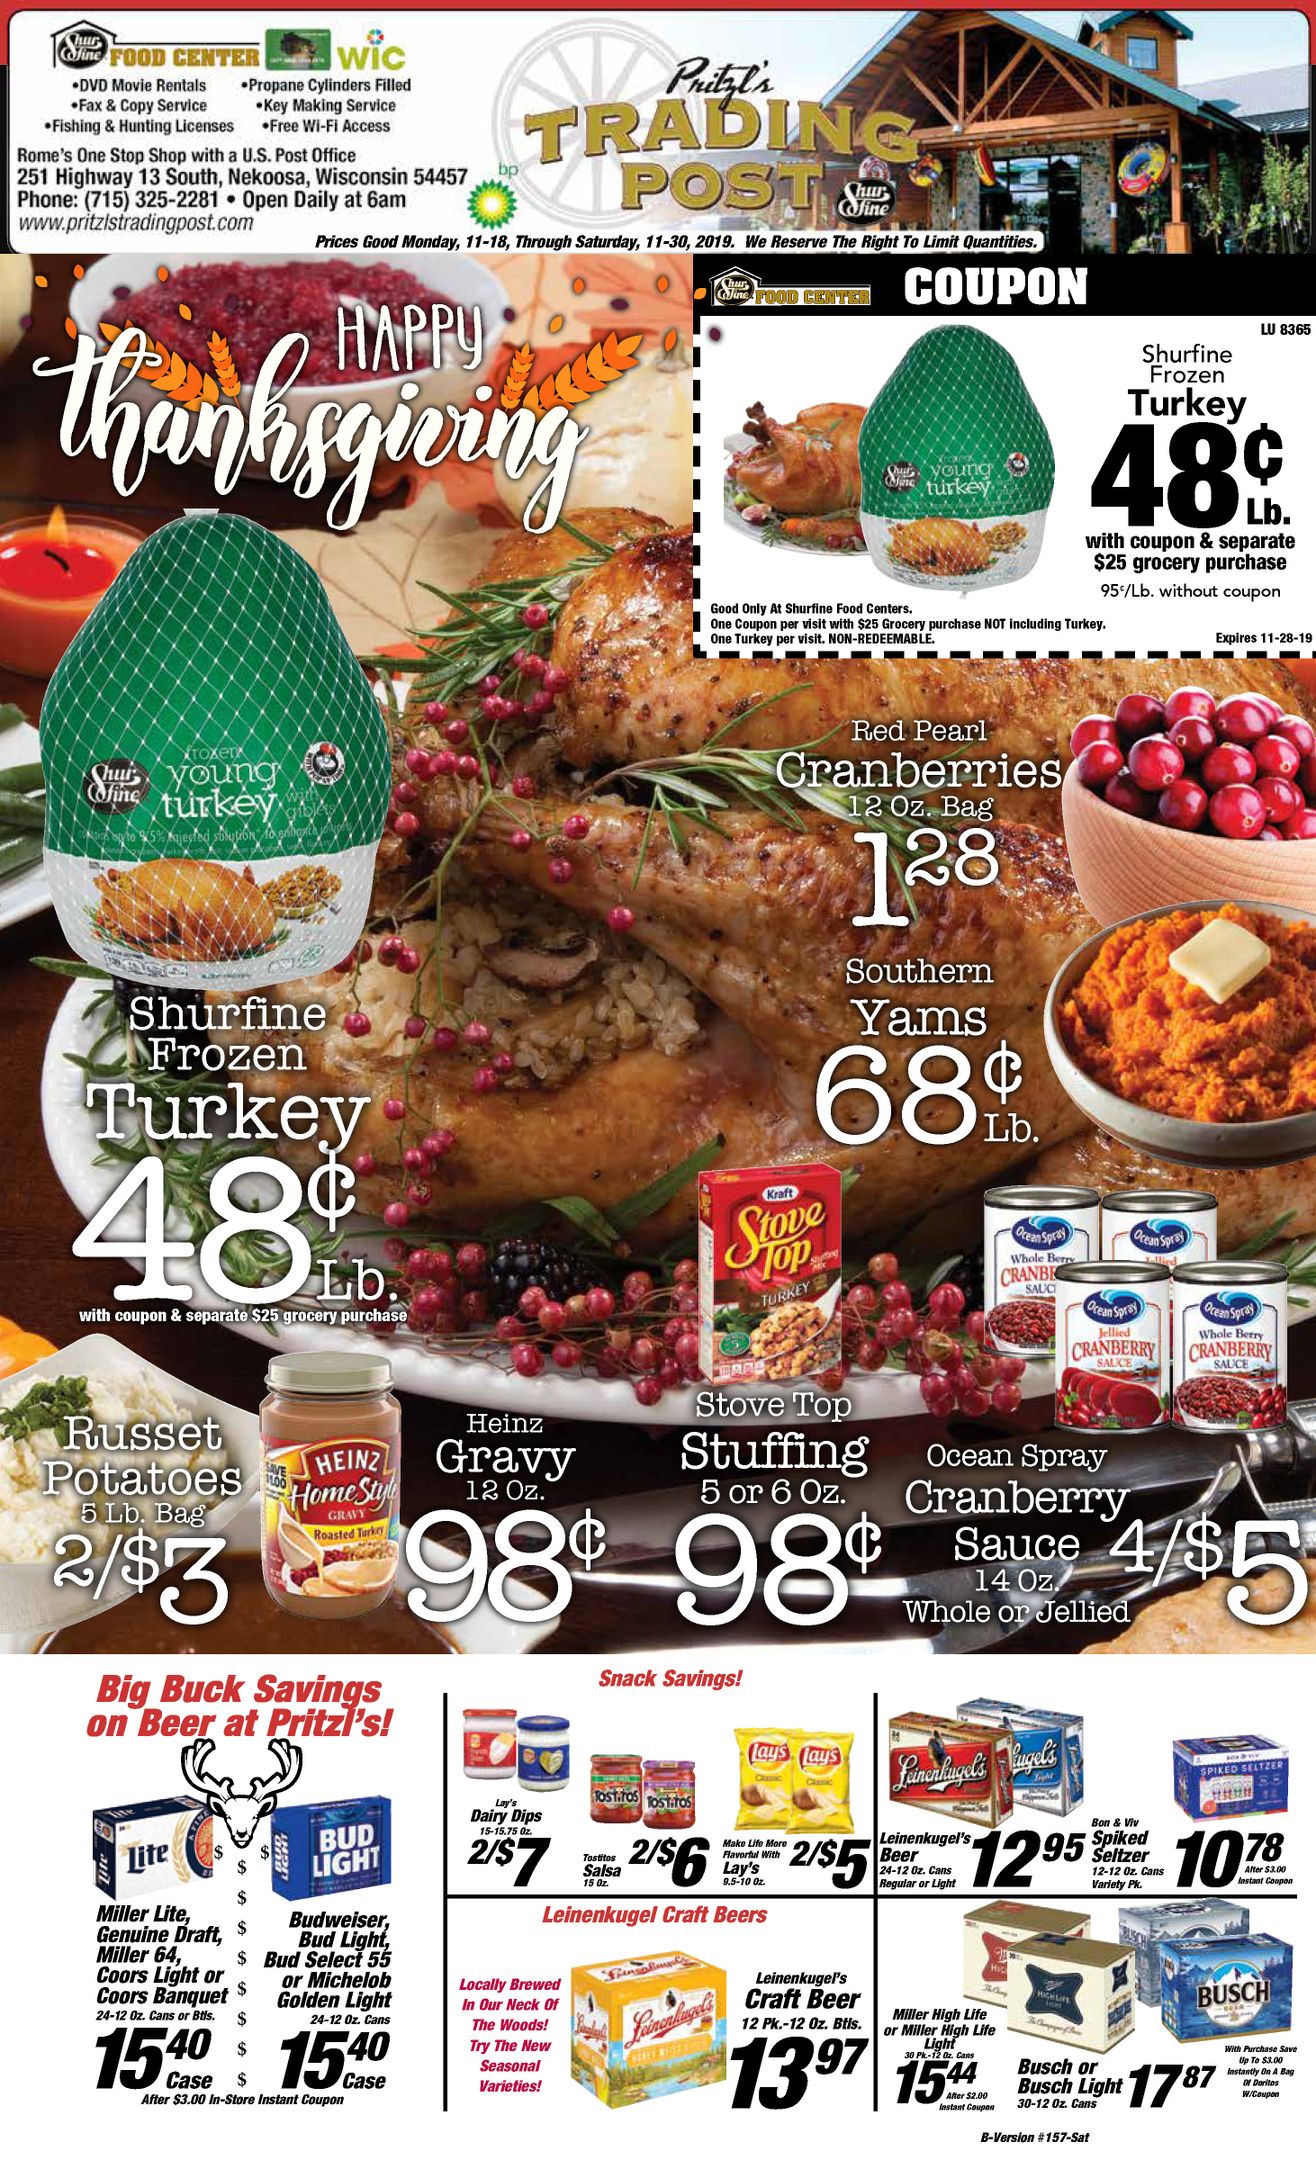 Pritzl's Trading Post Weekly Ad